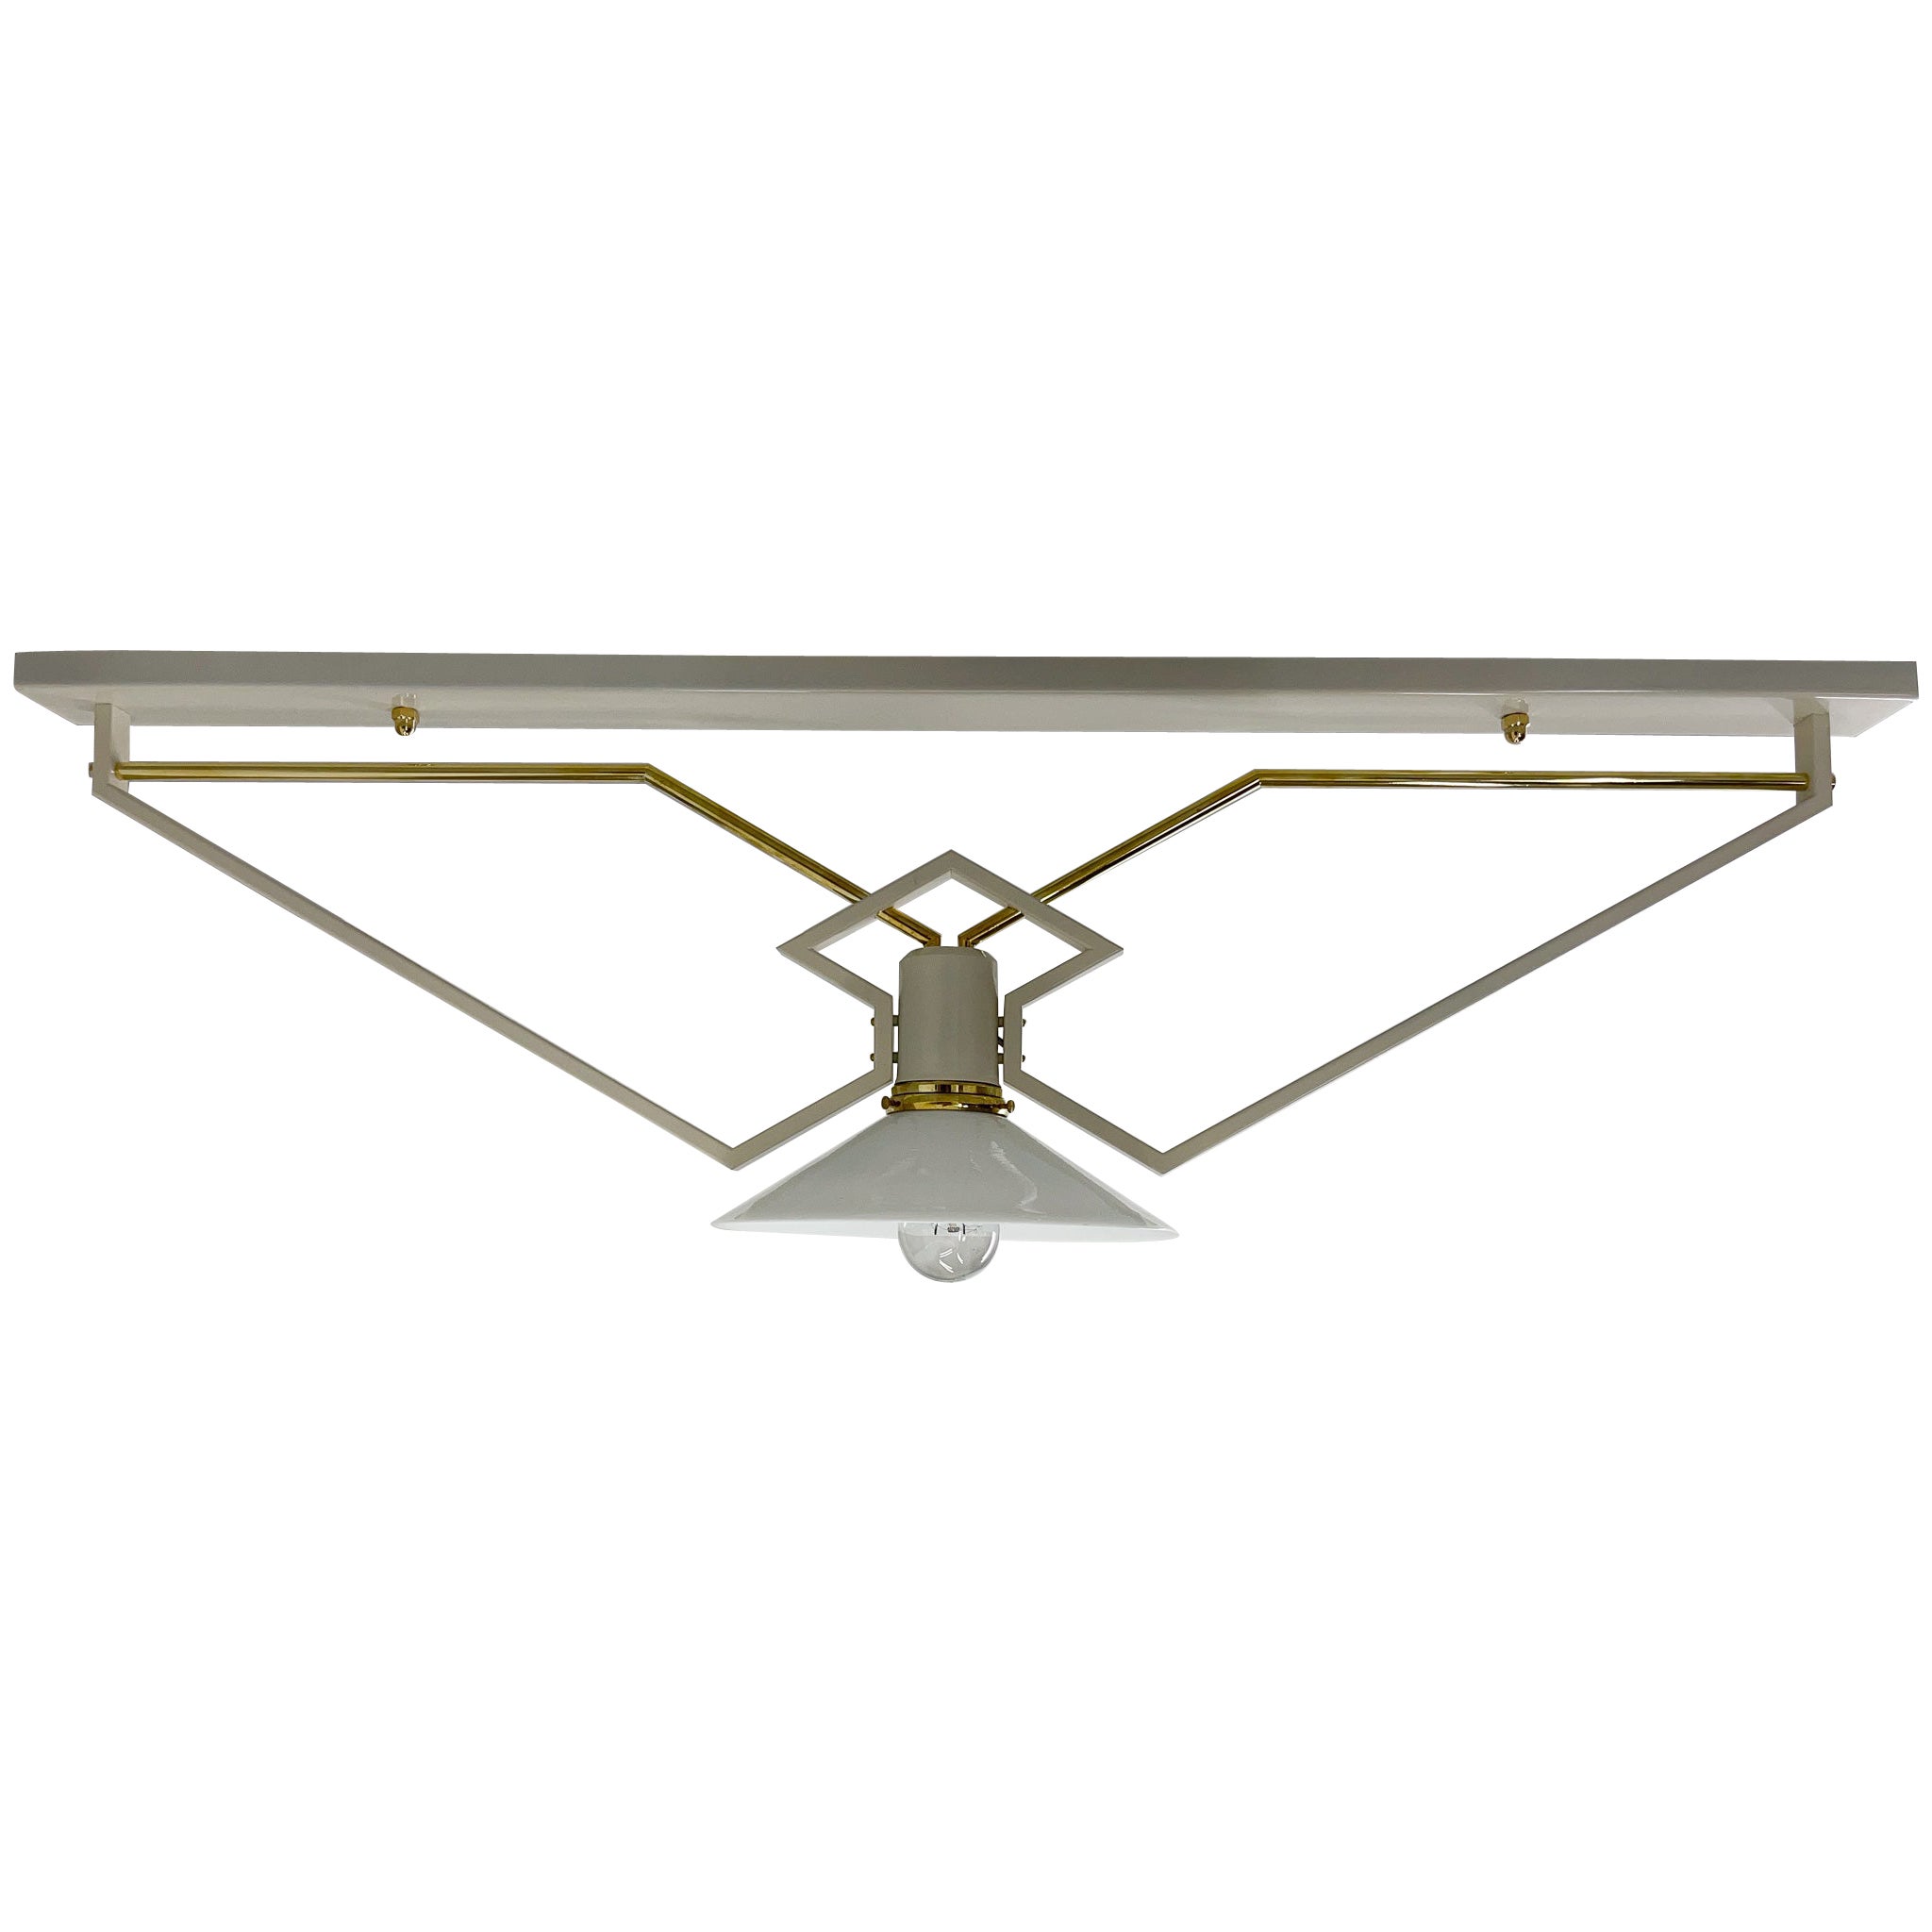 1950s Unique Ceiling Lights with Brass Details, Restored, 4 pieces available For Sale